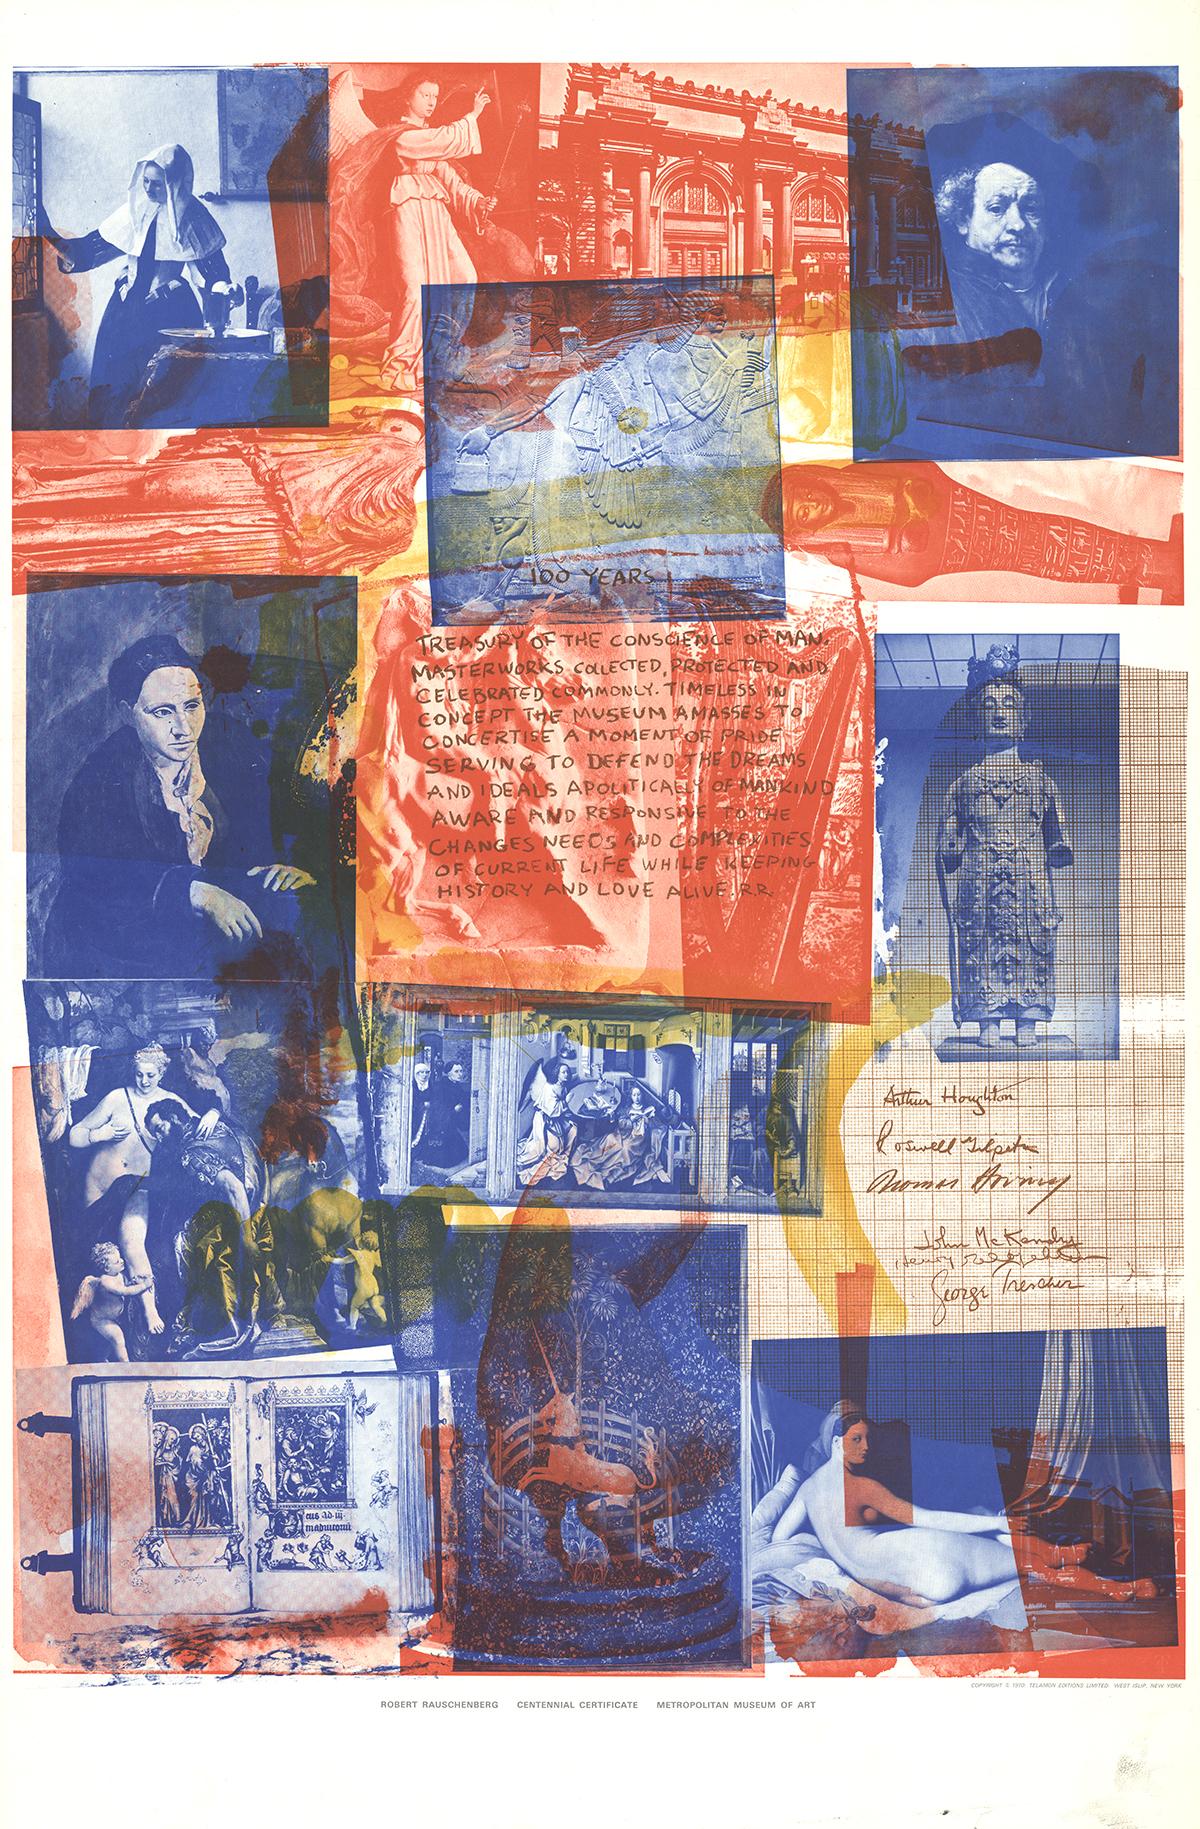 Published by the Metropolitan Museum of Art in 1970 and created by Robert Rauschenberg. The poster is a collage of famous paintings reproduced from the Metropolitan Museum of Art including works by Ingres, Rembrandt, Veronese, Boticelli, Picasso, an